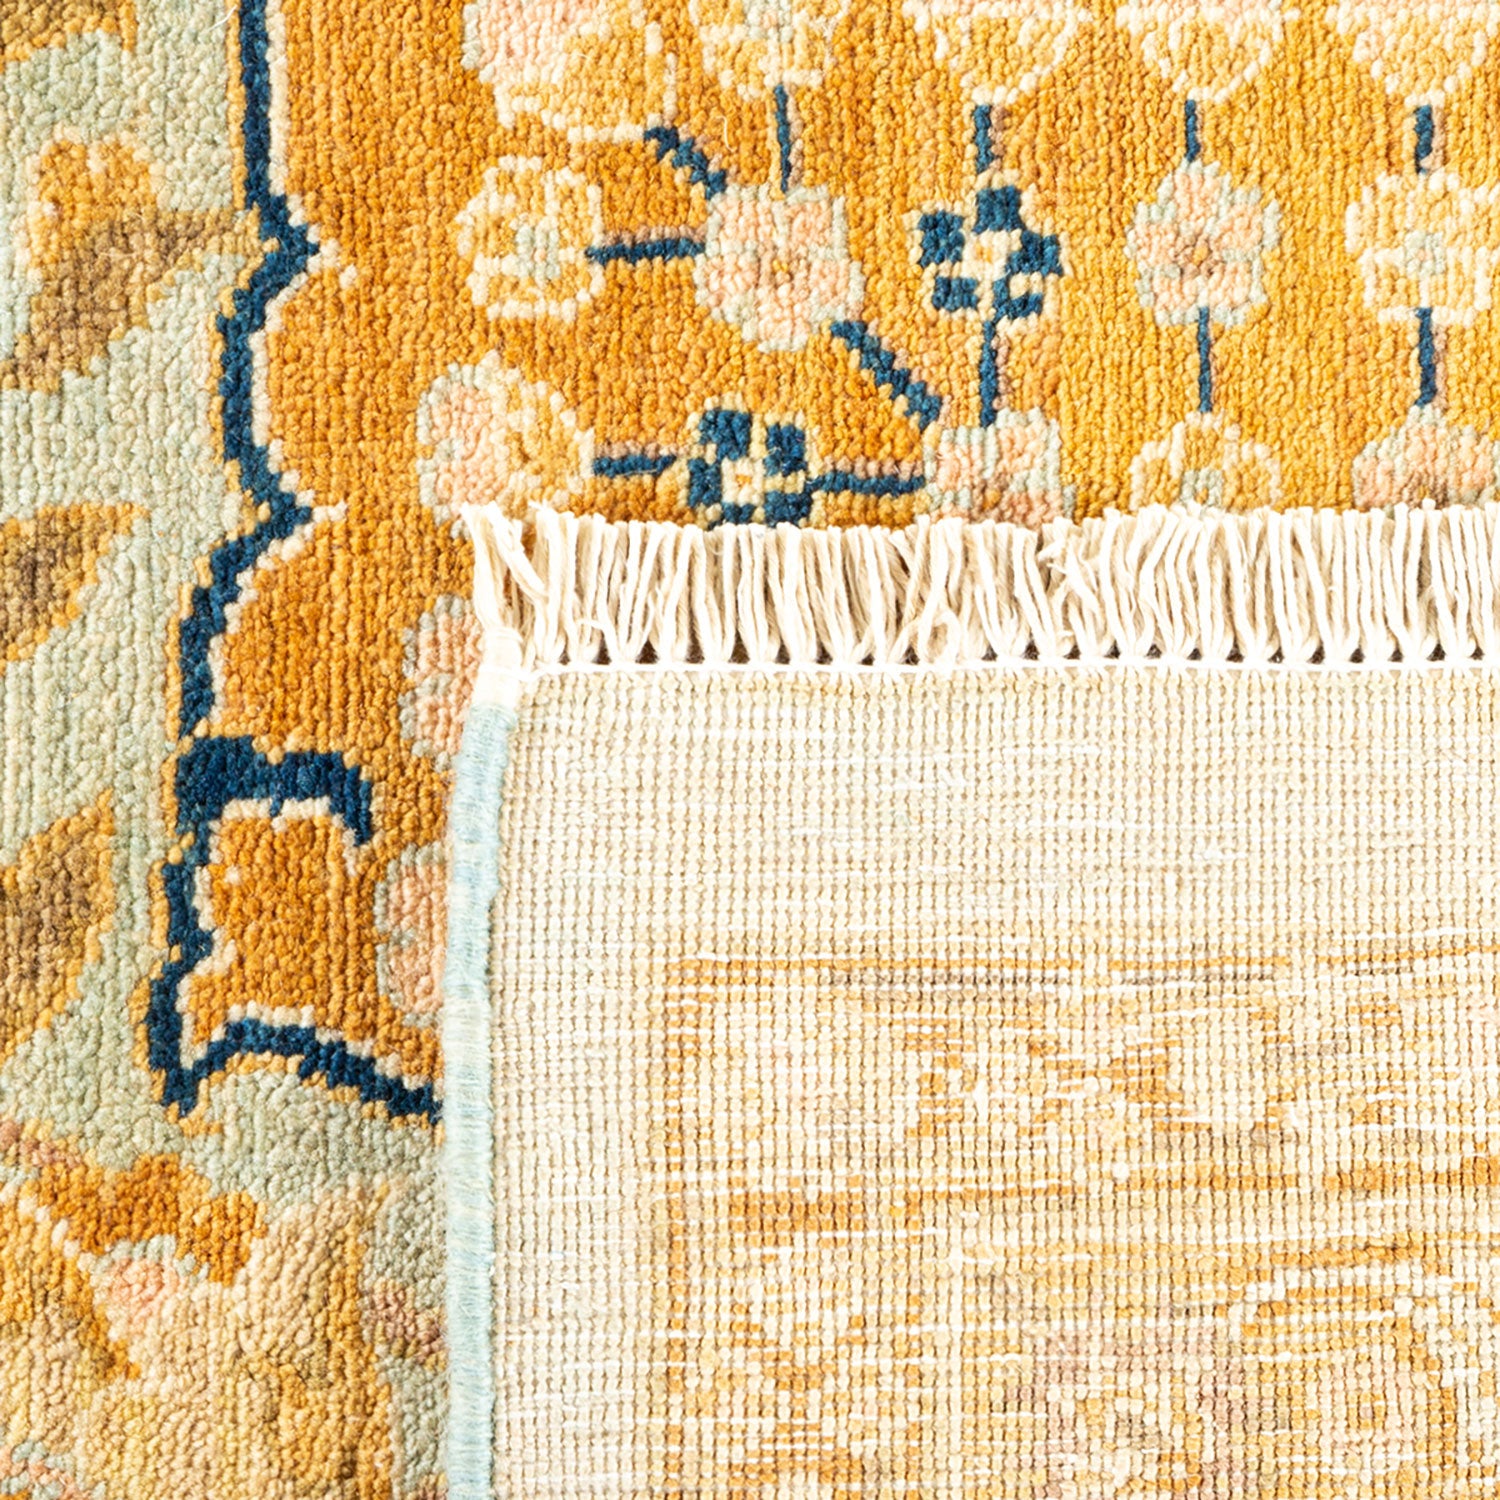 Close-up of a floral patterned rug with orange, blue, and beige shades.